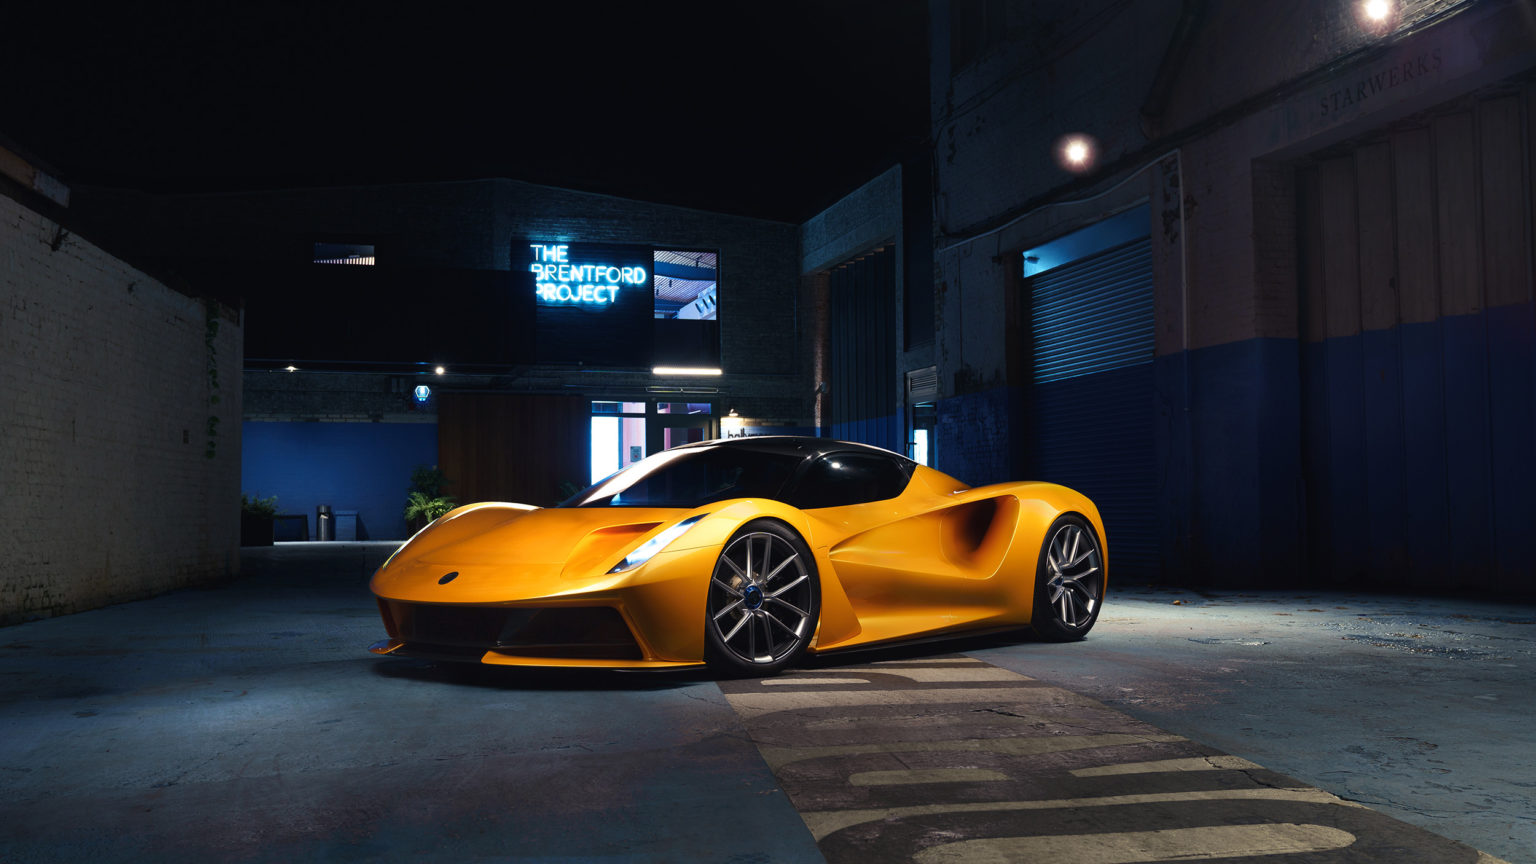 At Lotus Orlando, you can look at the 2021 Lotus Evija vs the all-new 2022 Lotus Evija and what changes have been made..